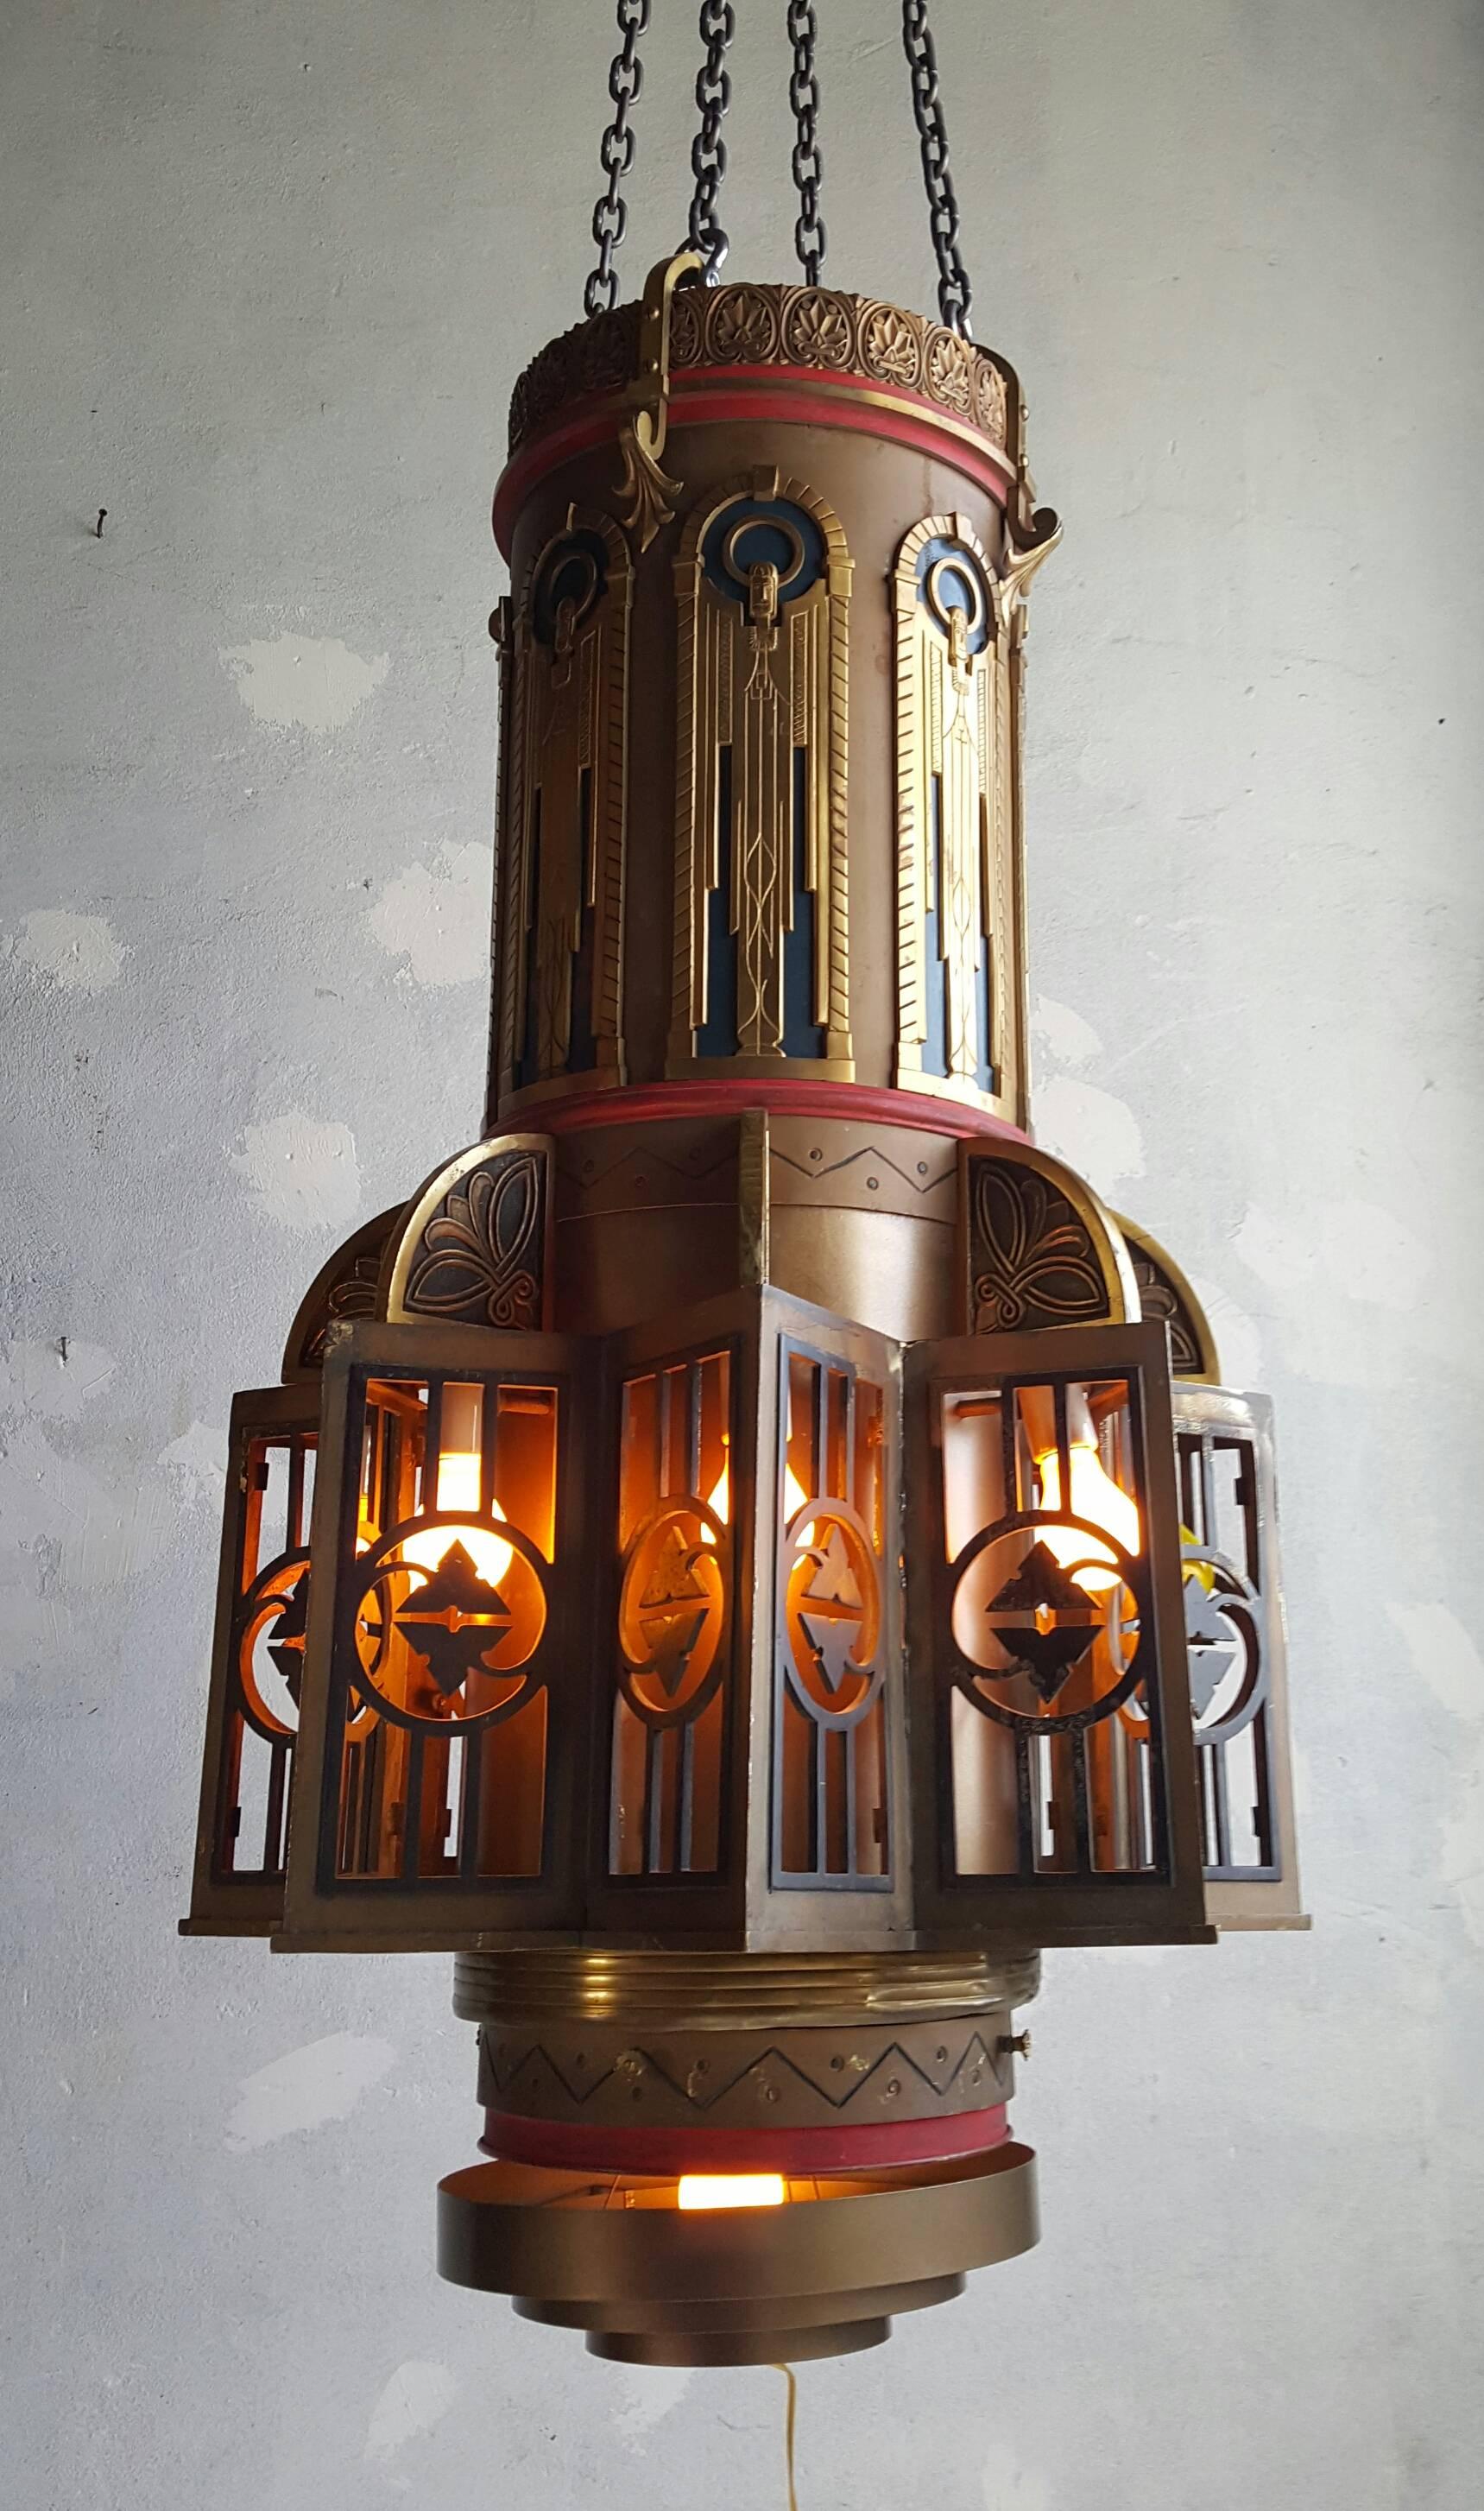 Outstanding pair of Art Deco hanging pendant / chandeliers. Salvaged from 1930s theater. Bronze and iron construction, stylized angel motif, custom glass panels will (can) be added if desired. Retains original decorative canopies, fully restored,